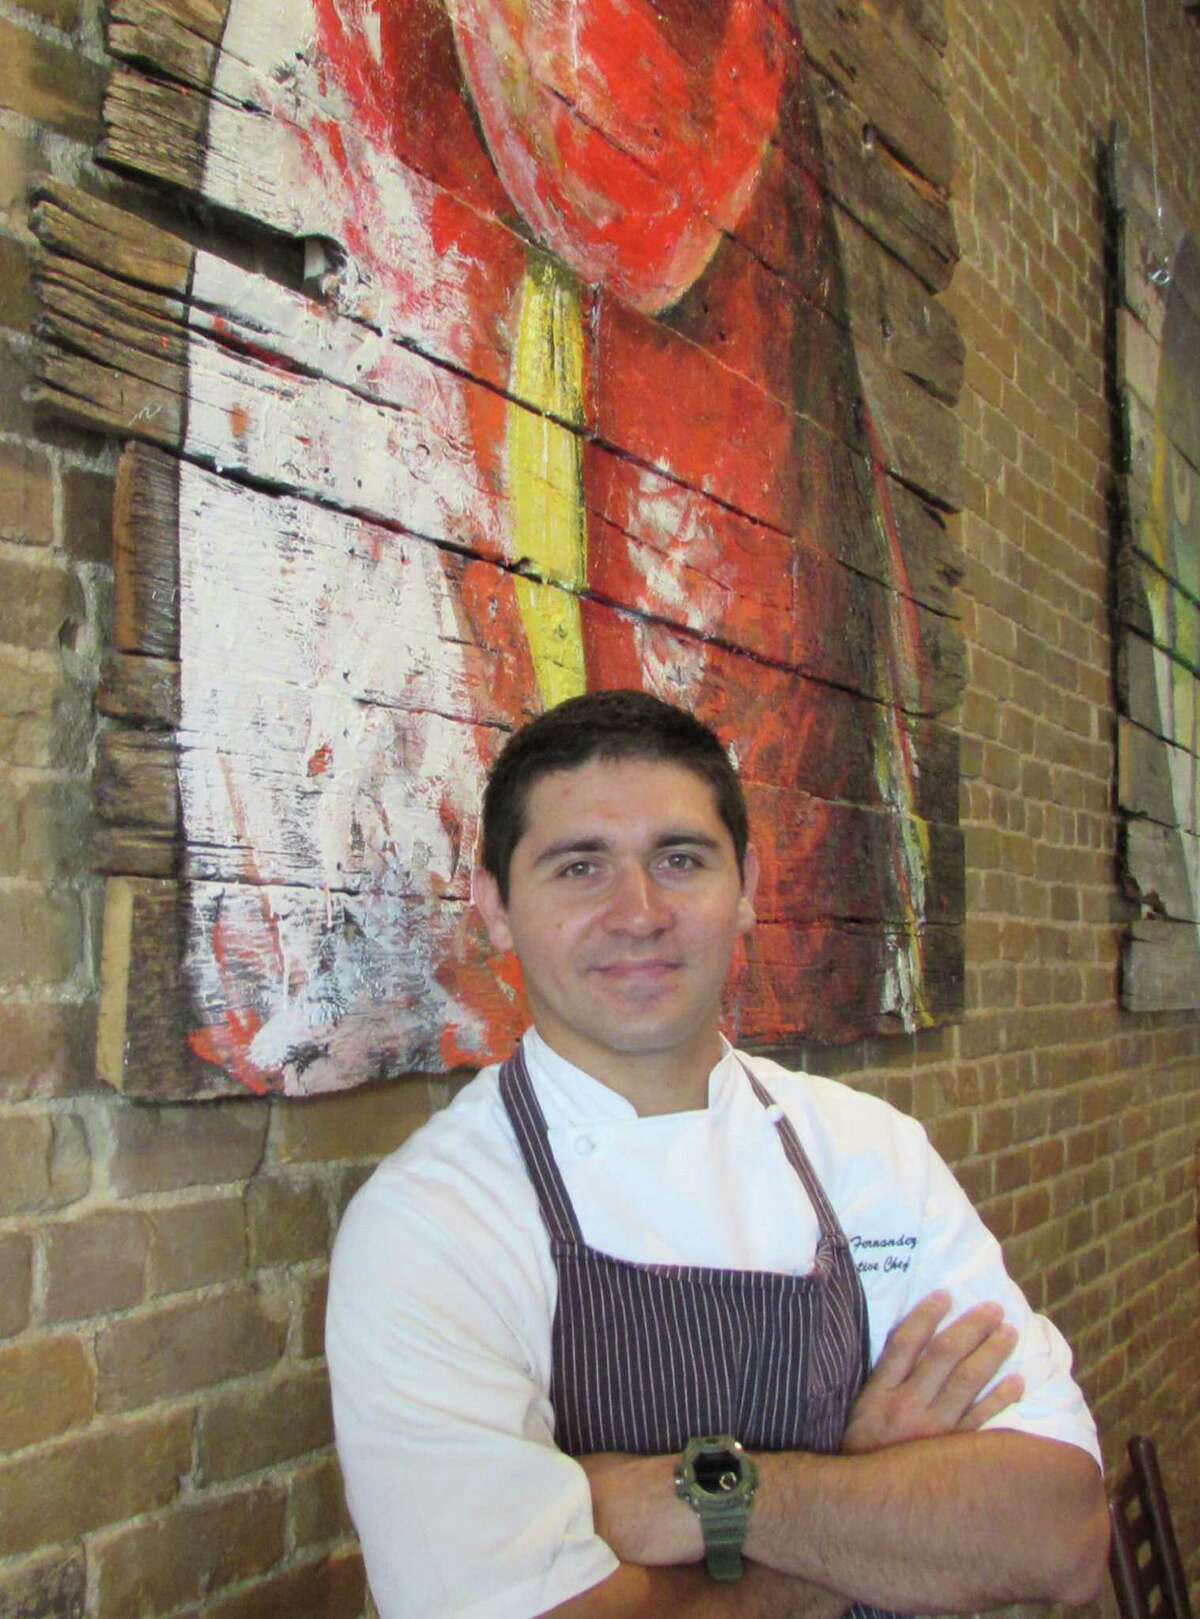 Diego Fernandez is the owner of Starfish, a new restaurant on South Alamo in Southtown.